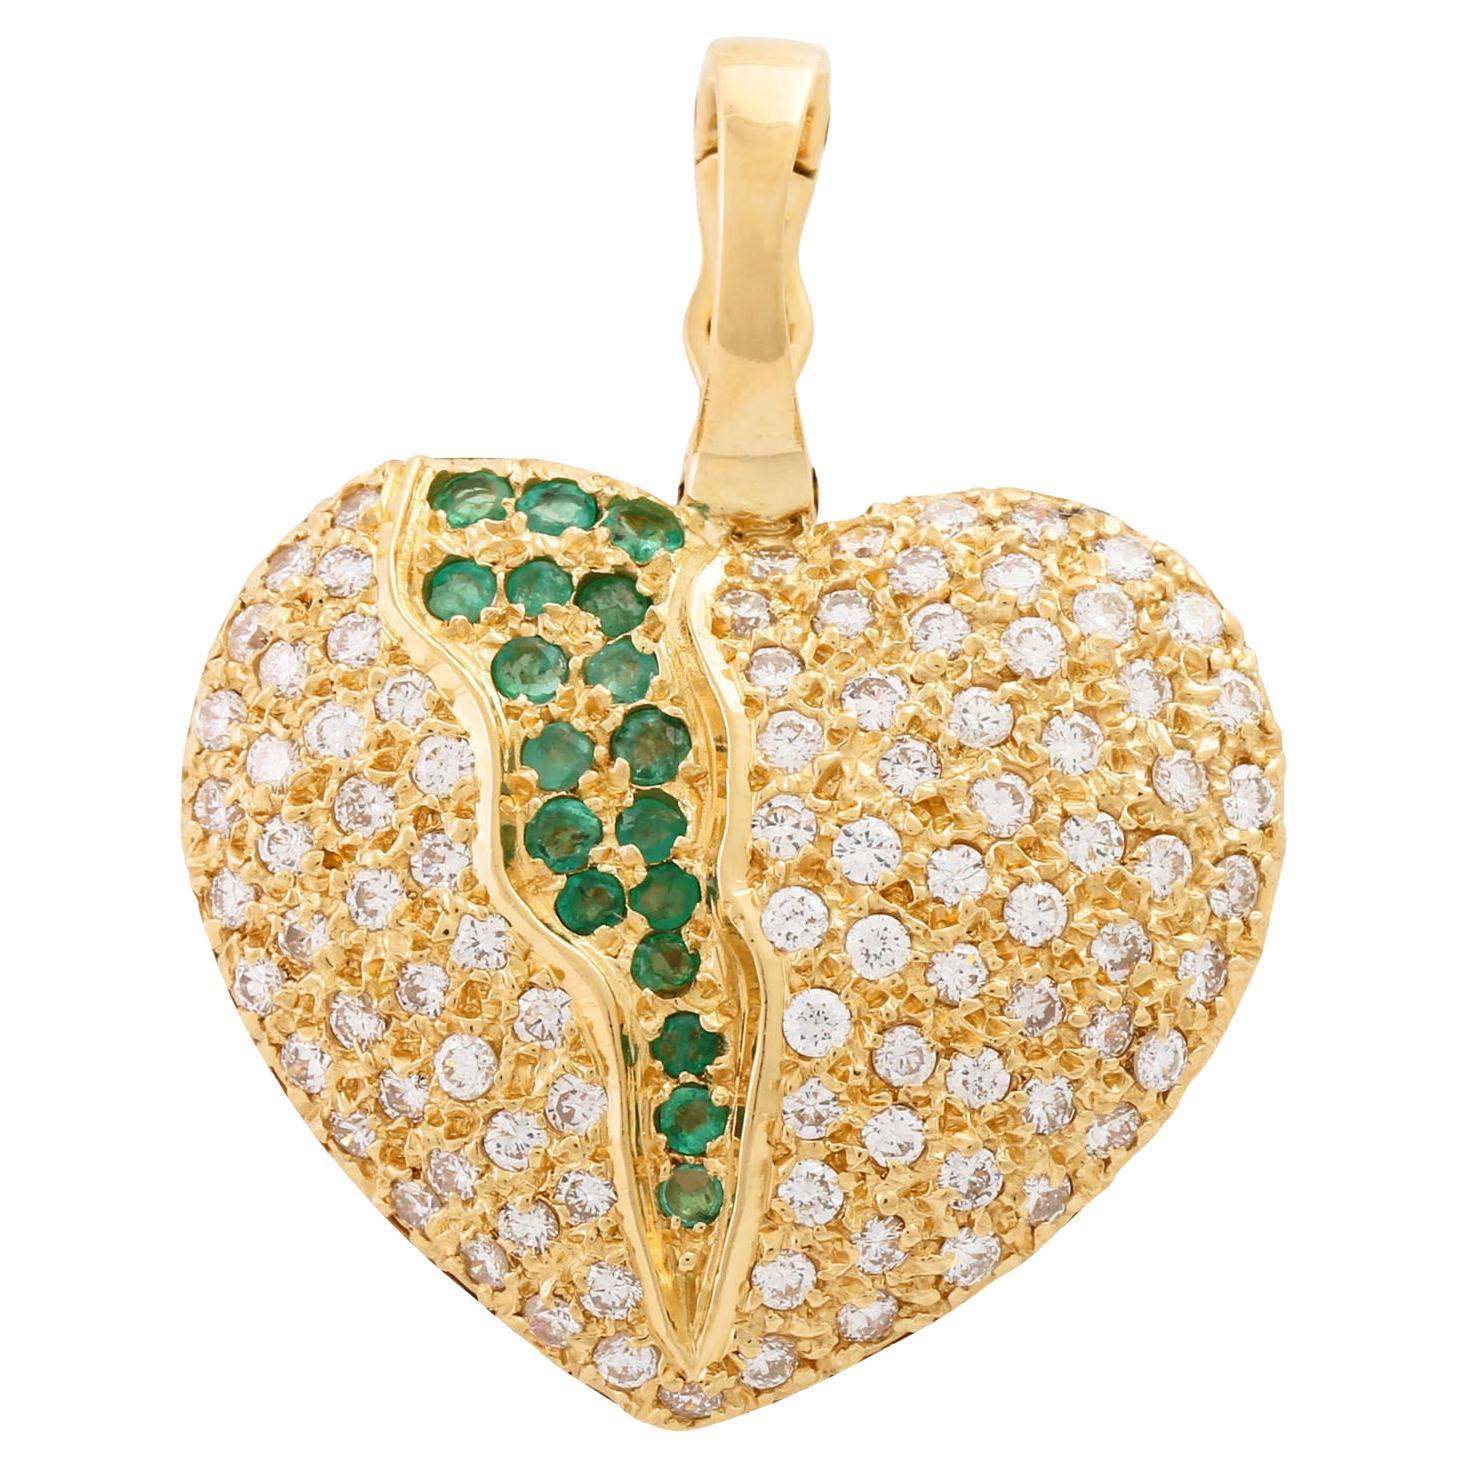 'Heart' Pendant with Emeralds and Brilliants